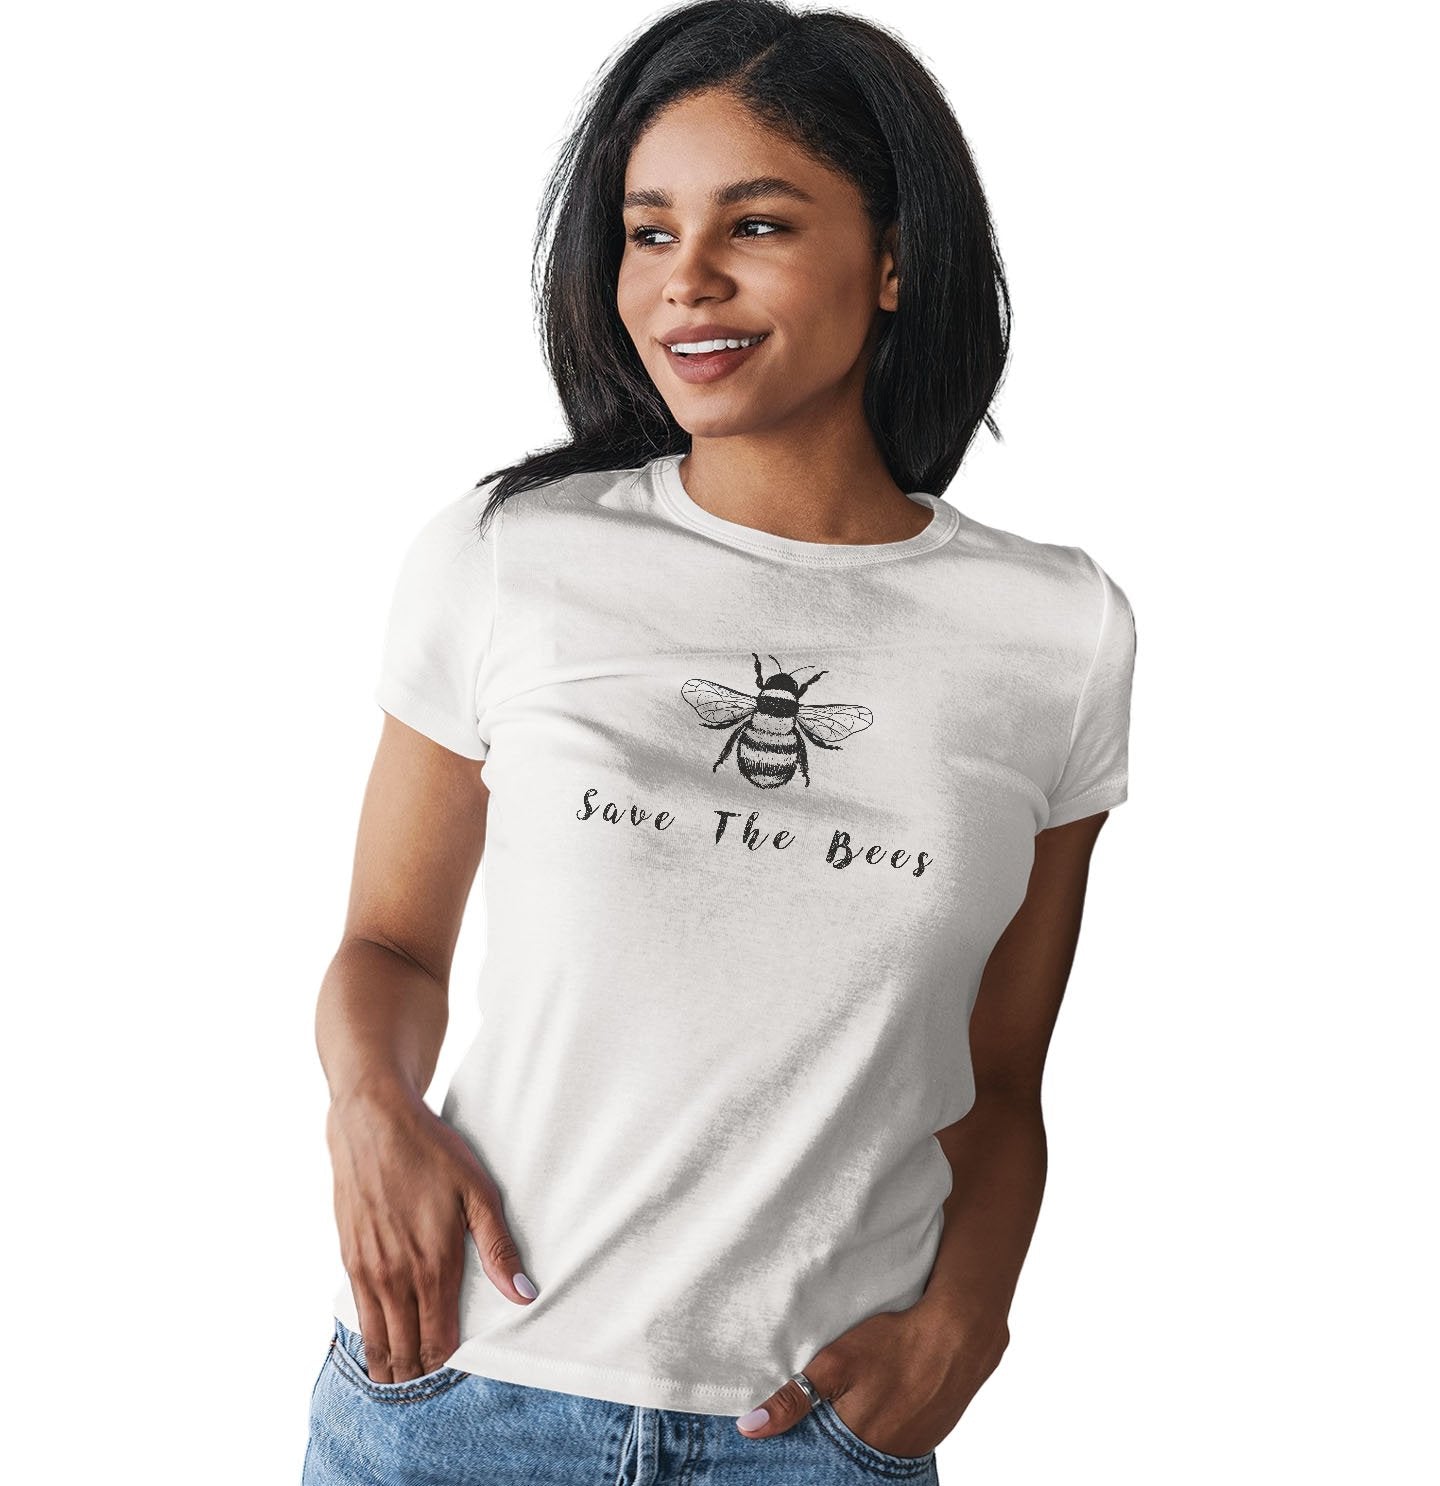 Save the Bees - Women's Fitted T-Shirt